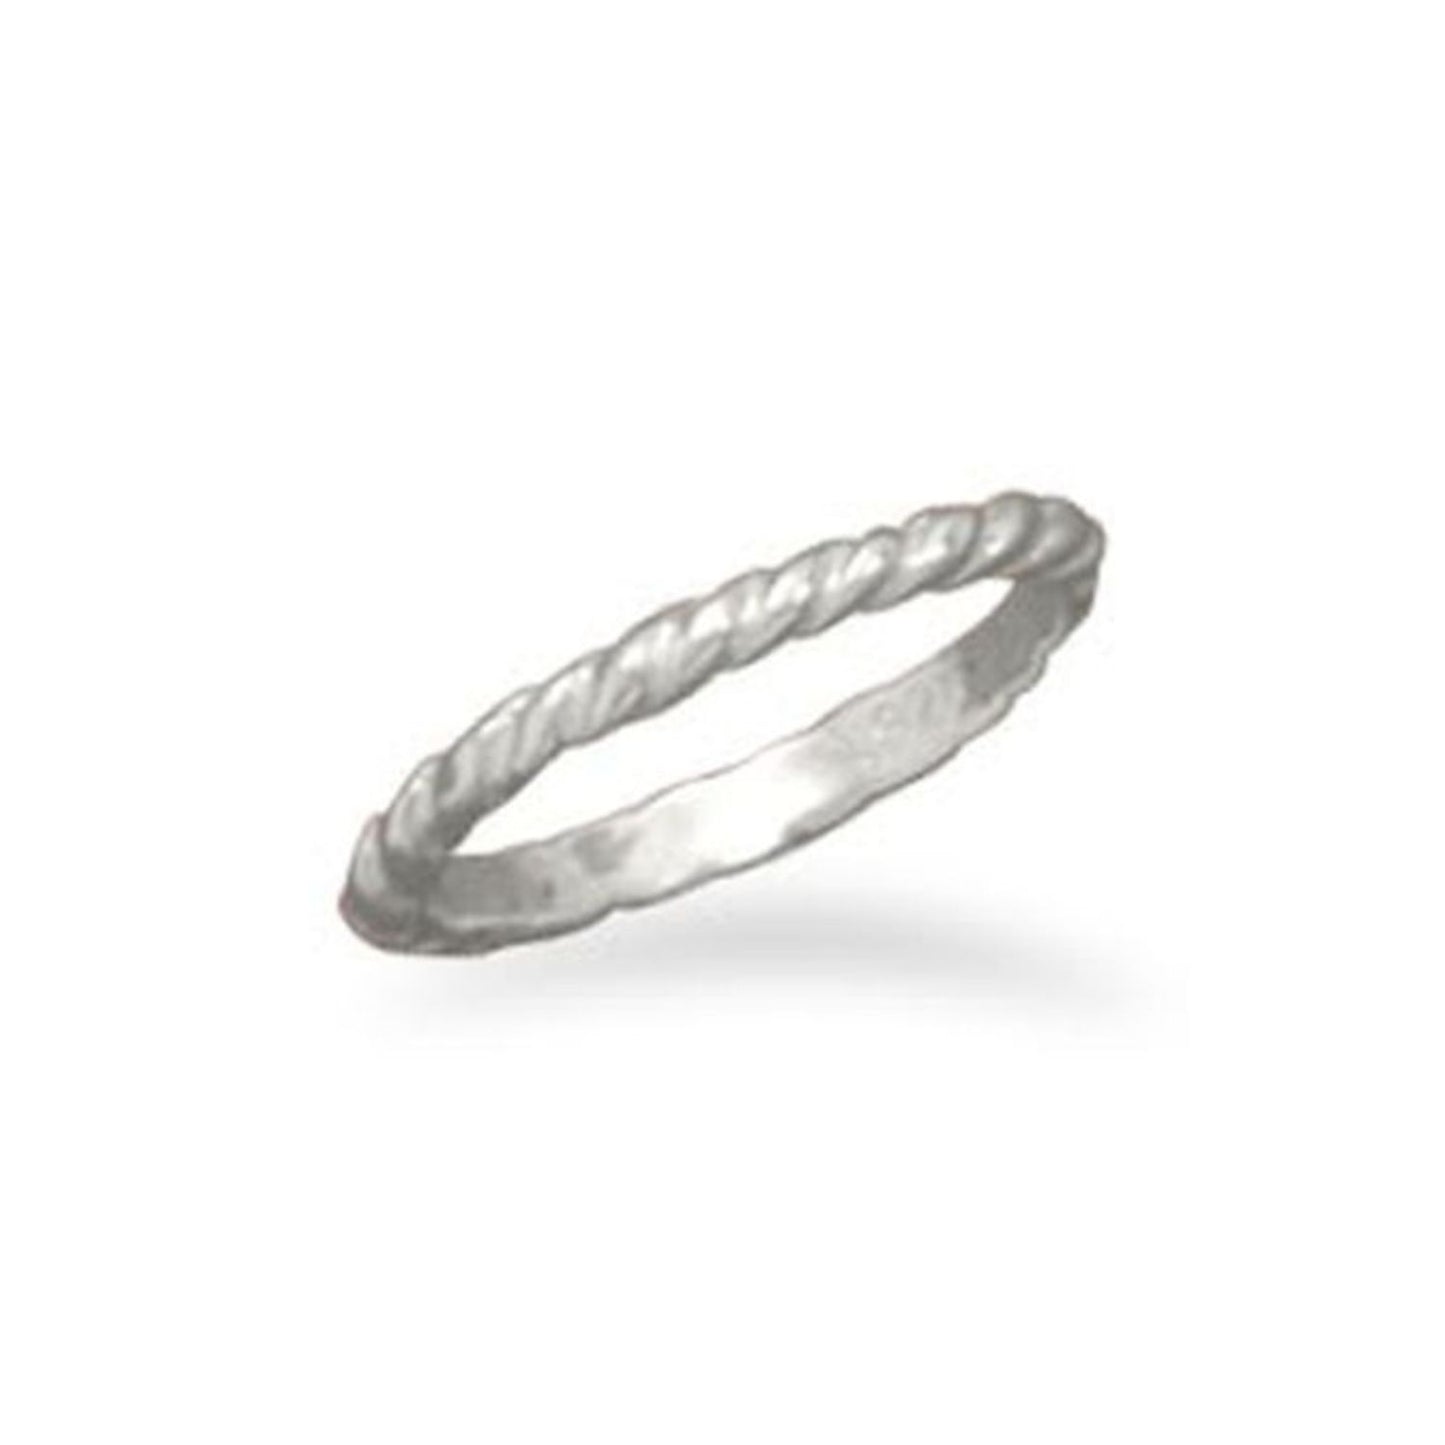 MMA Twisted Silver Baby Ring / Size 2